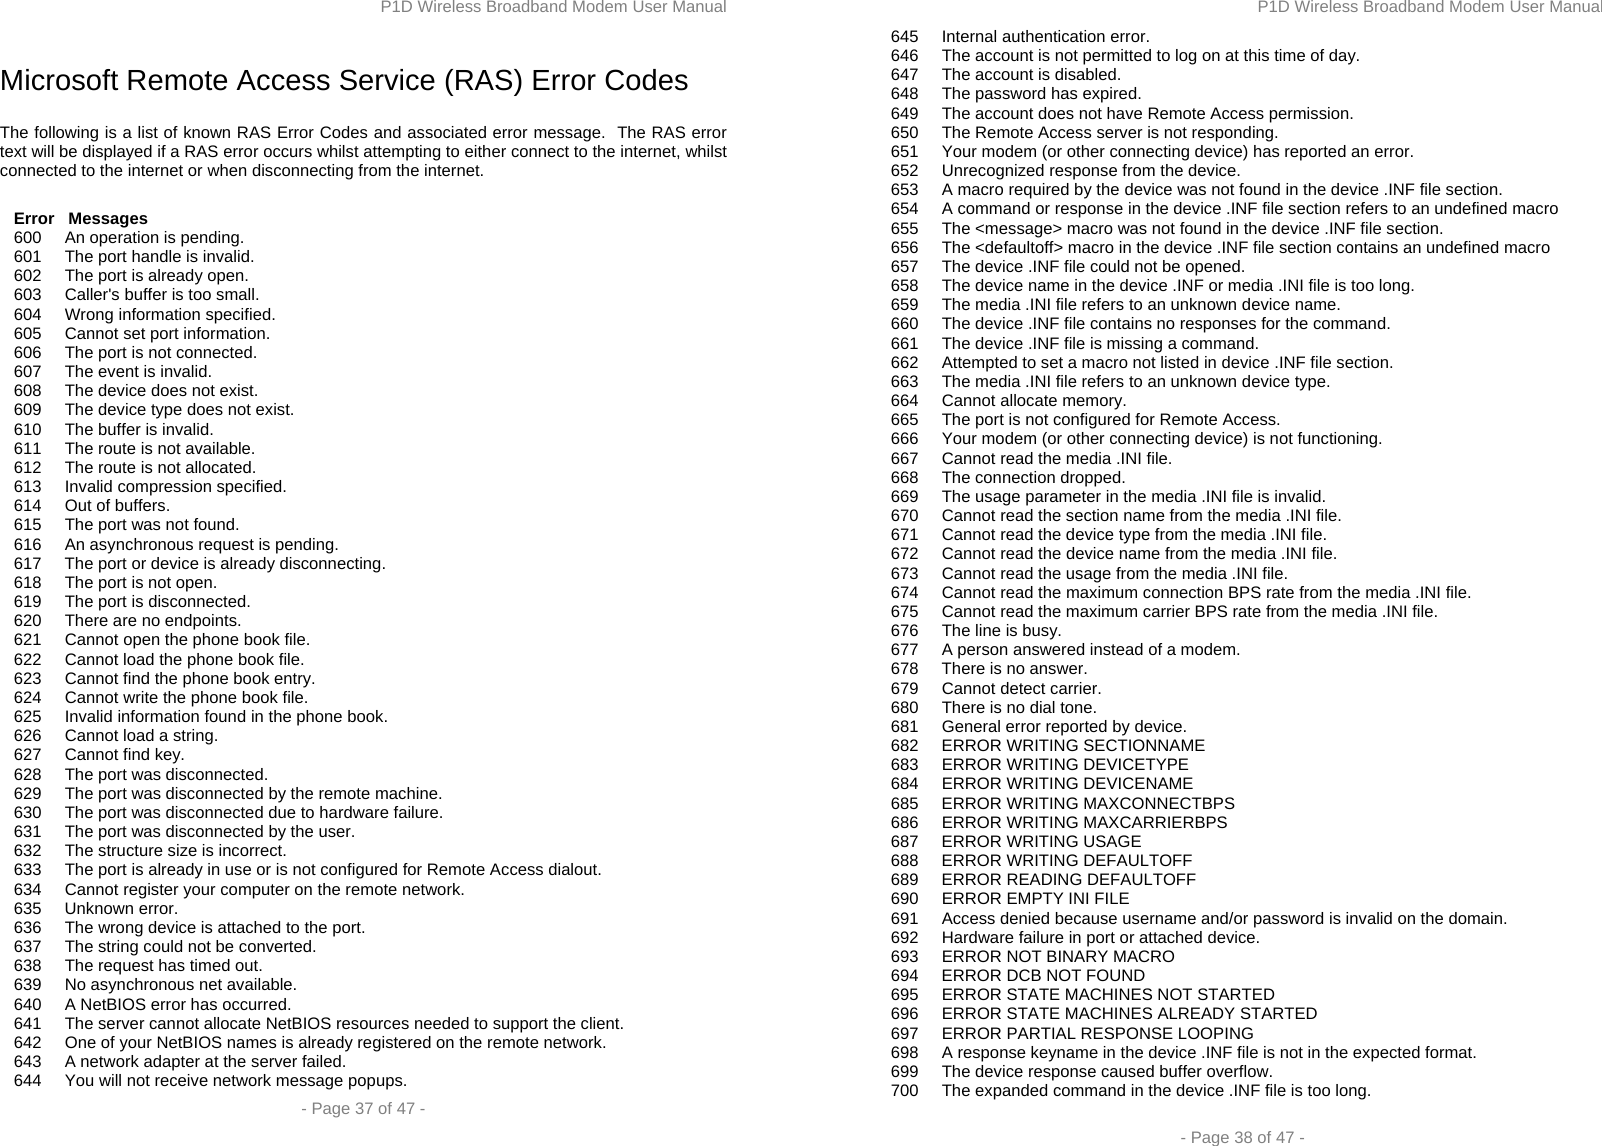 P1D Wireless Broadband Modem User Manual  - Page 37 of 47 -  Microsoft Remote Access Service (RAS) Error Codes   The following is a list of known RAS Error Codes and associated error message.  The RAS error text will be displayed if a RAS error occurs whilst attempting to either connect to the internet, whilst connected to the internet or when disconnecting from the internet.     Error   Messages    600     An operation is pending.    601     The port handle is invalid.    602     The port is already open.    603     Caller&apos;s buffer is too small.    604     Wrong information specified.    605     Cannot set port information.    606     The port is not connected.    607     The event is invalid.    608     The device does not exist.    609     The device type does not exist.    610     The buffer is invalid.    611     The route is not available.    612     The route is not allocated.    613     Invalid compression specified.    614     Out of buffers.    615     The port was not found.    616     An asynchronous request is pending.    617     The port or device is already disconnecting.    618     The port is not open.    619     The port is disconnected.    620     There are no endpoints.    621     Cannot open the phone book file.    622     Cannot load the phone book file.    623     Cannot find the phone book entry.    624     Cannot write the phone book file.    625     Invalid information found in the phone book.    626     Cannot load a string.    627     Cannot find key.    628     The port was disconnected.    629     The port was disconnected by the remote machine.    630     The port was disconnected due to hardware failure.    631     The port was disconnected by the user.    632     The structure size is incorrect.    633     The port is already in use or is not configured for Remote Access dialout.    634     Cannot register your computer on the remote network.    635     Unknown error.    636     The wrong device is attached to the port.    637     The string could not be converted.    638     The request has timed out.    639     No asynchronous net available.    640     A NetBIOS error has occurred.    641     The server cannot allocate NetBIOS resources needed to support the client.    642     One of your NetBIOS names is already registered on the remote network.    643     A network adapter at the server failed.    644     You will not receive network message popups. P1D Wireless Broadband Modem User Manual  - Page 38 of 47 -    645     Internal authentication error.    646     The account is not permitted to log on at this time of day.    647     The account is disabled.    648     The password has expired.    649     The account does not have Remote Access permission.    650     The Remote Access server is not responding.    651     Your modem (or other connecting device) has reported an error.    652     Unrecognized response from the device.    653     A macro required by the device was not found in the device .INF file section.    654     A command or response in the device .INF file section refers to an undefined macro    655     The &lt;message&gt; macro was not found in the device .INF file section.    656     The &lt;defaultoff&gt; macro in the device .INF file section contains an undefined macro    657     The device .INF file could not be opened.    658     The device name in the device .INF or media .INI file is too long.    659     The media .INI file refers to an unknown device name.    660     The device .INF file contains no responses for the command.    661     The device .INF file is missing a command.    662     Attempted to set a macro not listed in device .INF file section.    663     The media .INI file refers to an unknown device type.    664     Cannot allocate memory.    665     The port is not configured for Remote Access.    666     Your modem (or other connecting device) is not functioning.    667     Cannot read the media .INI file.    668     The connection dropped.    669     The usage parameter in the media .INI file is invalid.    670     Cannot read the section name from the media .INI file.    671     Cannot read the device type from the media .INI file.    672     Cannot read the device name from the media .INI file.    673     Cannot read the usage from the media .INI file.    674     Cannot read the maximum connection BPS rate from the media .INI file.    675     Cannot read the maximum carrier BPS rate from the media .INI file.    676     The line is busy.    677     A person answered instead of a modem.    678     There is no answer.    679     Cannot detect carrier.    680     There is no dial tone.    681     General error reported by device.    682     ERROR WRITING SECTIONNAME    683     ERROR WRITING DEVICETYPE    684     ERROR WRITING DEVICENAME    685     ERROR WRITING MAXCONNECTBPS    686     ERROR WRITING MAXCARRIERBPS    687     ERROR WRITING USAGE    688     ERROR WRITING DEFAULTOFF    689     ERROR READING DEFAULTOFF    690     ERROR EMPTY INI FILE    691     Access denied because username and/or password is invalid on the domain.    692     Hardware failure in port or attached device.    693     ERROR NOT BINARY MACRO    694     ERROR DCB NOT FOUND    695     ERROR STATE MACHINES NOT STARTED    696     ERROR STATE MACHINES ALREADY STARTED    697     ERROR PARTIAL RESPONSE LOOPING    698     A response keyname in the device .INF file is not in the expected format.    699     The device response caused buffer overflow.    700     The expanded command in the device .INF file is too long. 